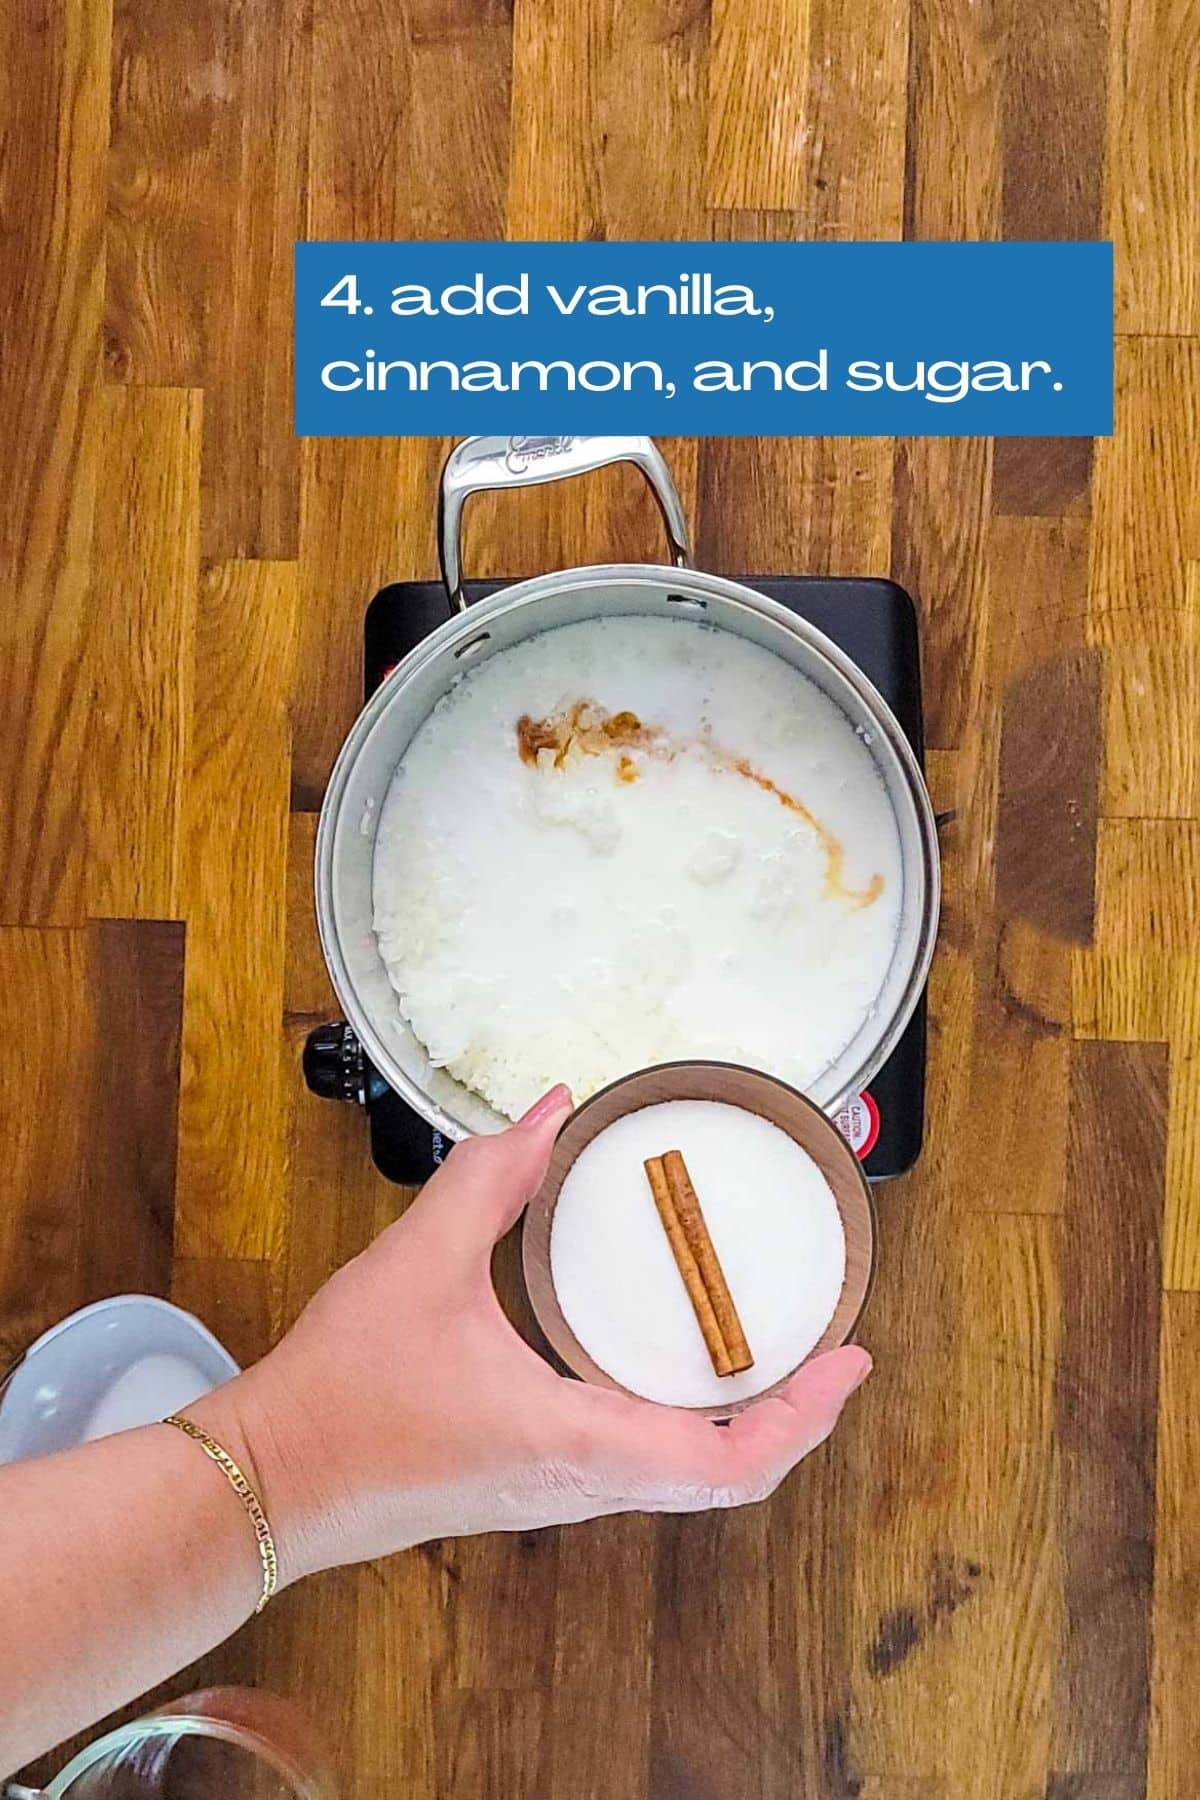 A sauce pan with rice, milk, coconut milk, vanilla. Now adding a cup of half a cup of granulated sugar and a cinnamon stick.